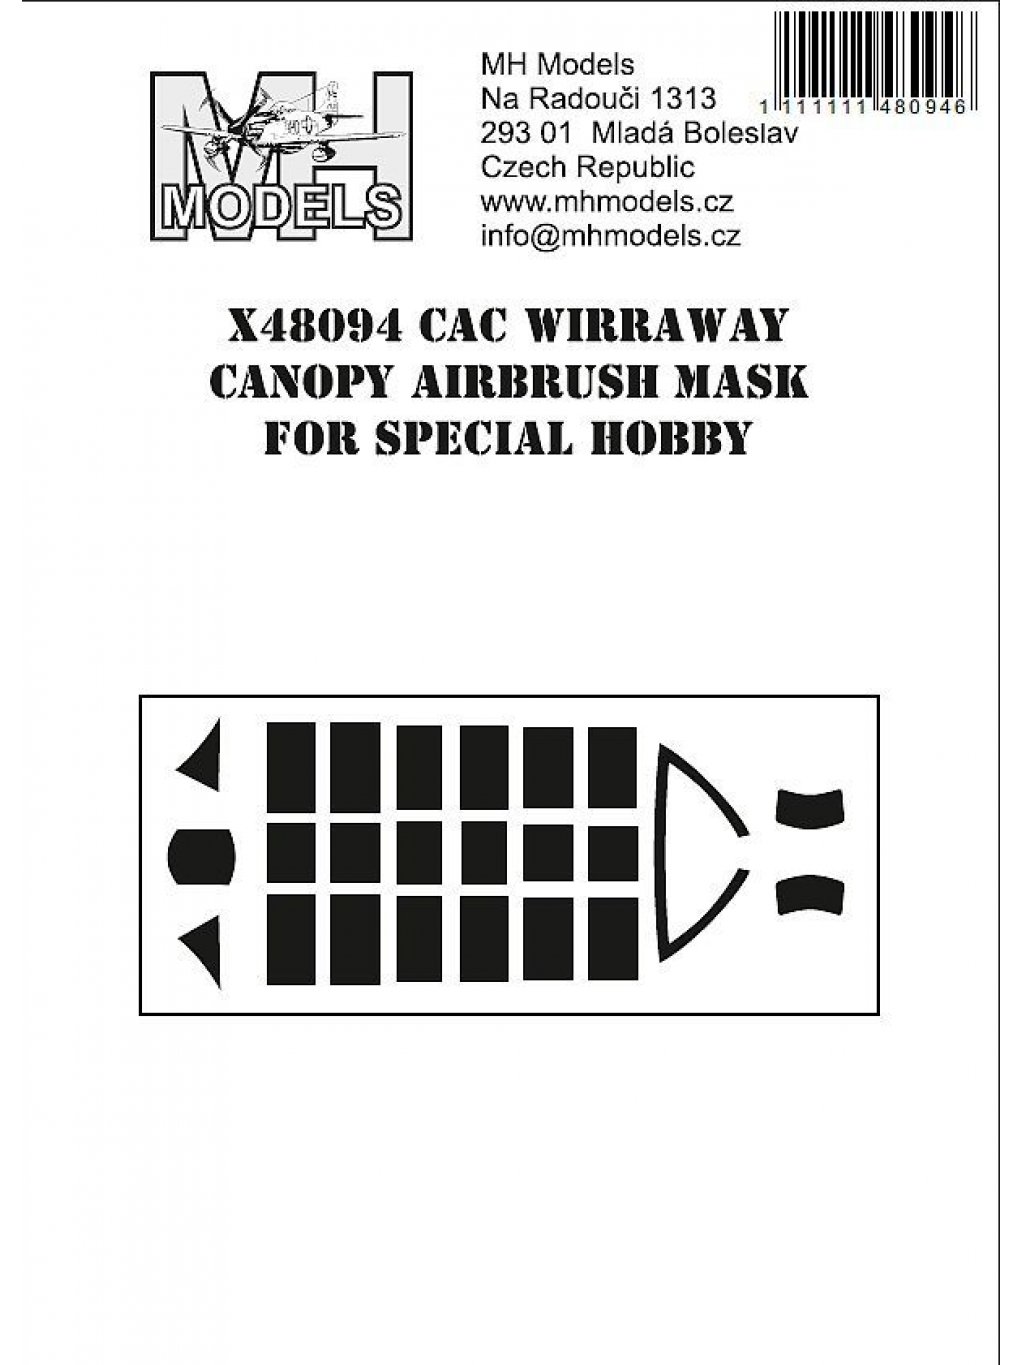 CAC Wirraway Canopy airbrush mask for Special Hobby